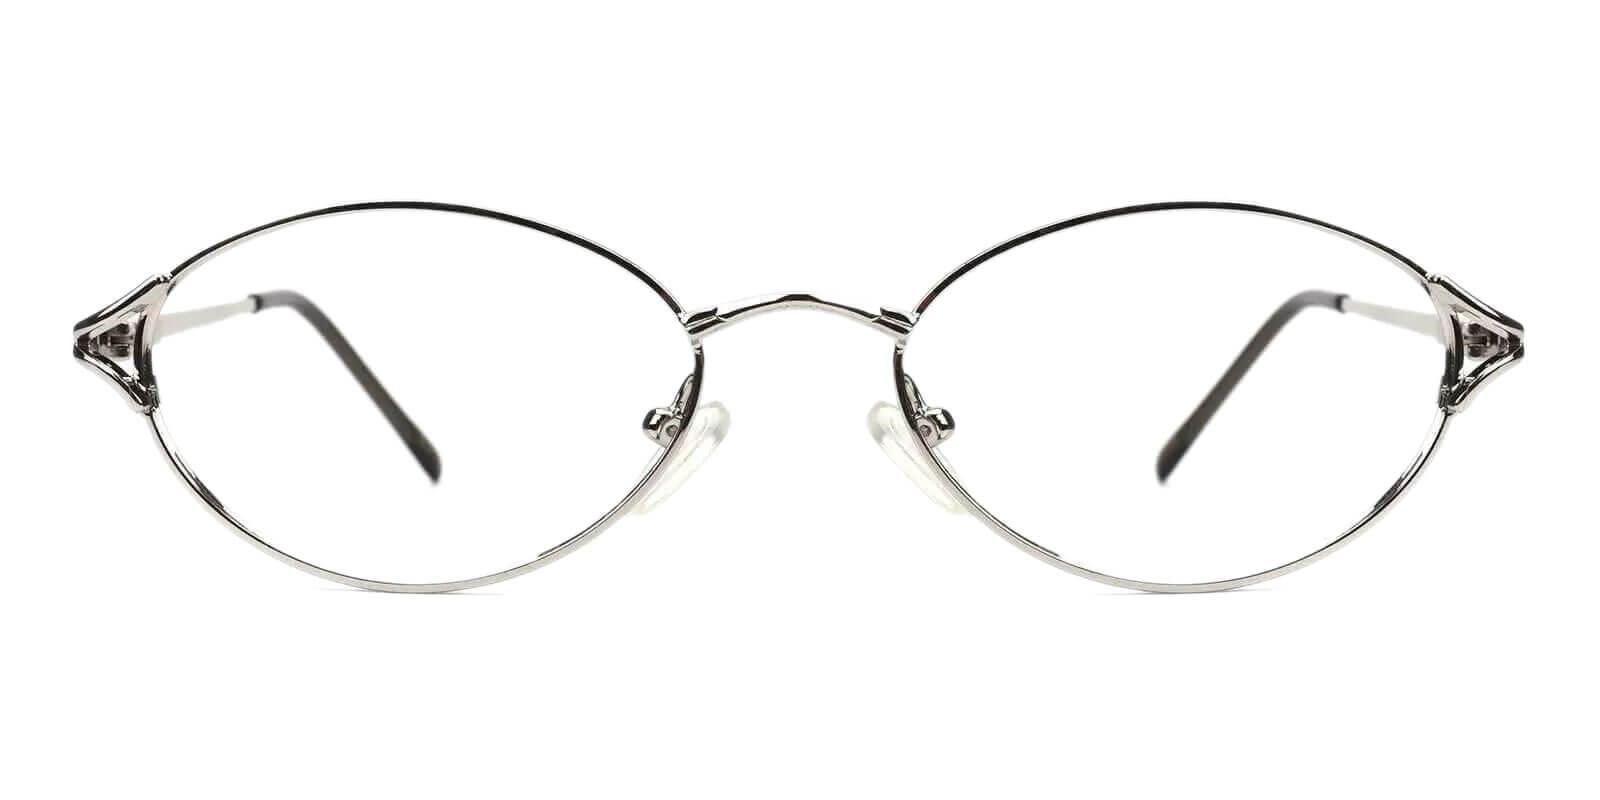 Cora Silver Metal Eyeglasses , NosePads Frames from ABBE Glasses